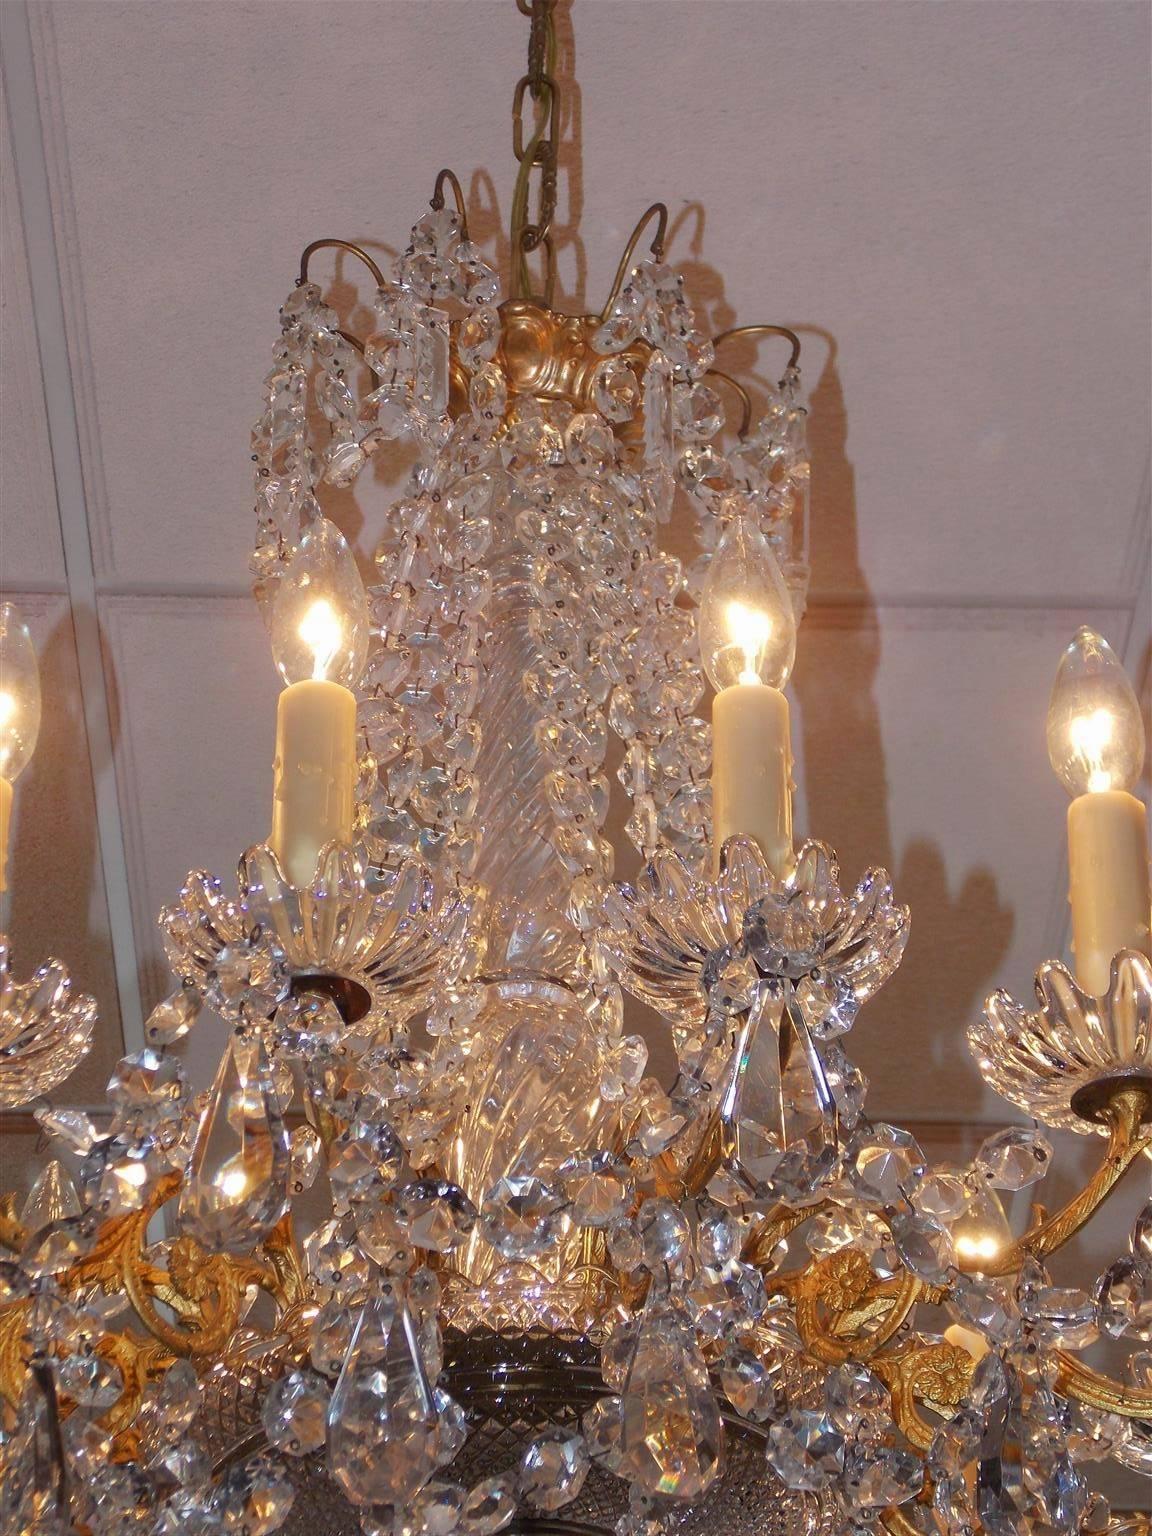 Louis XVI French Baccarat Gilt Bronze and Crystal Twelve-Arm Chandelier, Circa 1820 For Sale